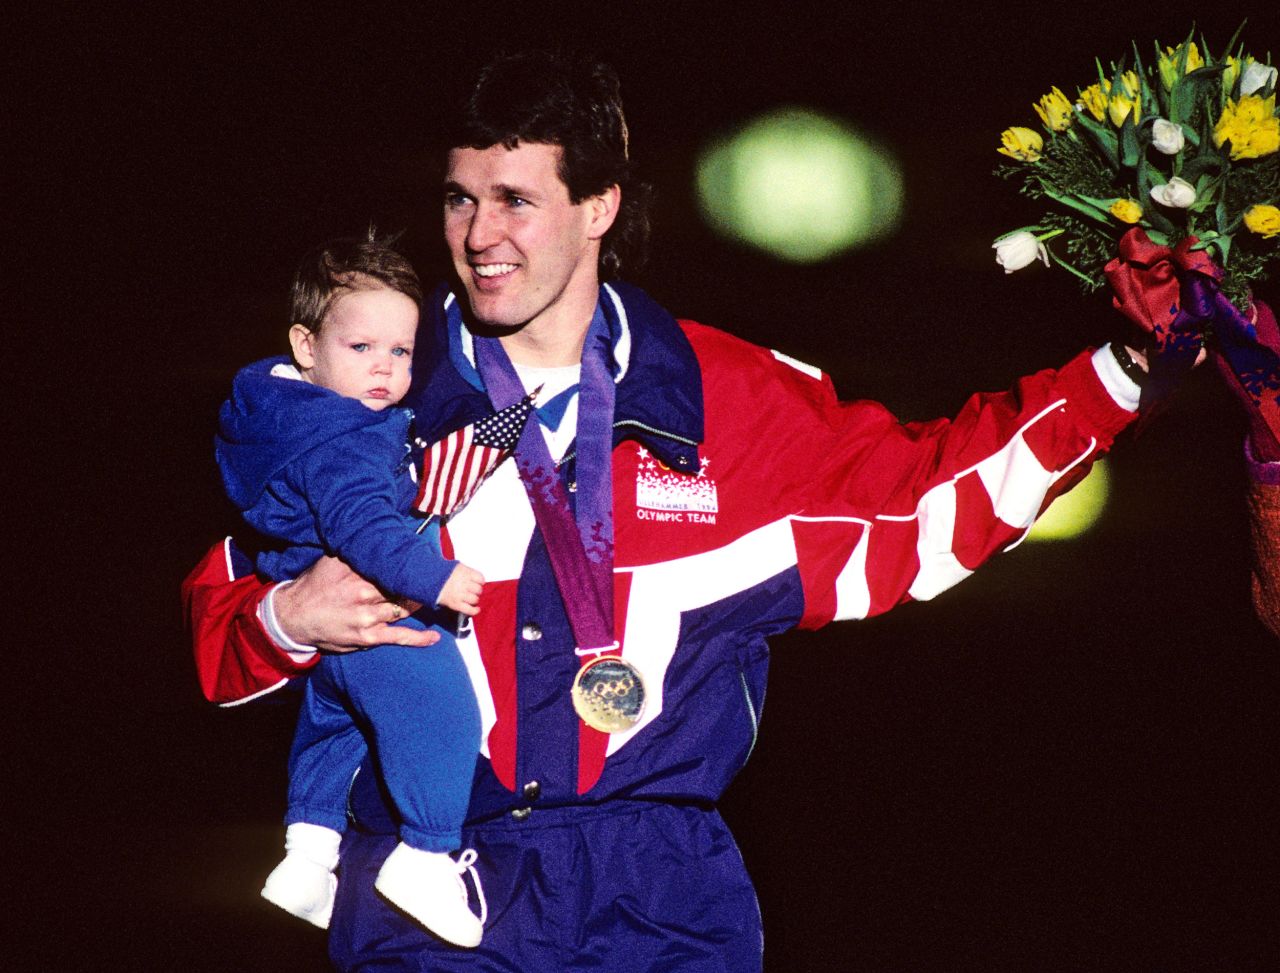 Dan Jansen's story is one of the most emotional in the history of the Winter Olympics. The American speedskater was the favorite to win the 500 meters at the 1988 Games, but on the day of the race he learned that his sister had died of leukemia. He fell on the first turn and didn't medal. A few days later, he fell again in the 1,000 meters. Medals eluded Jansen at the 1992 Games as well, but he finally broke through to win the 1,000 meters in 1994. He celebrated in front of a roaring crowd and then lifted up his baby daughter Jane, who was named after his late sister.